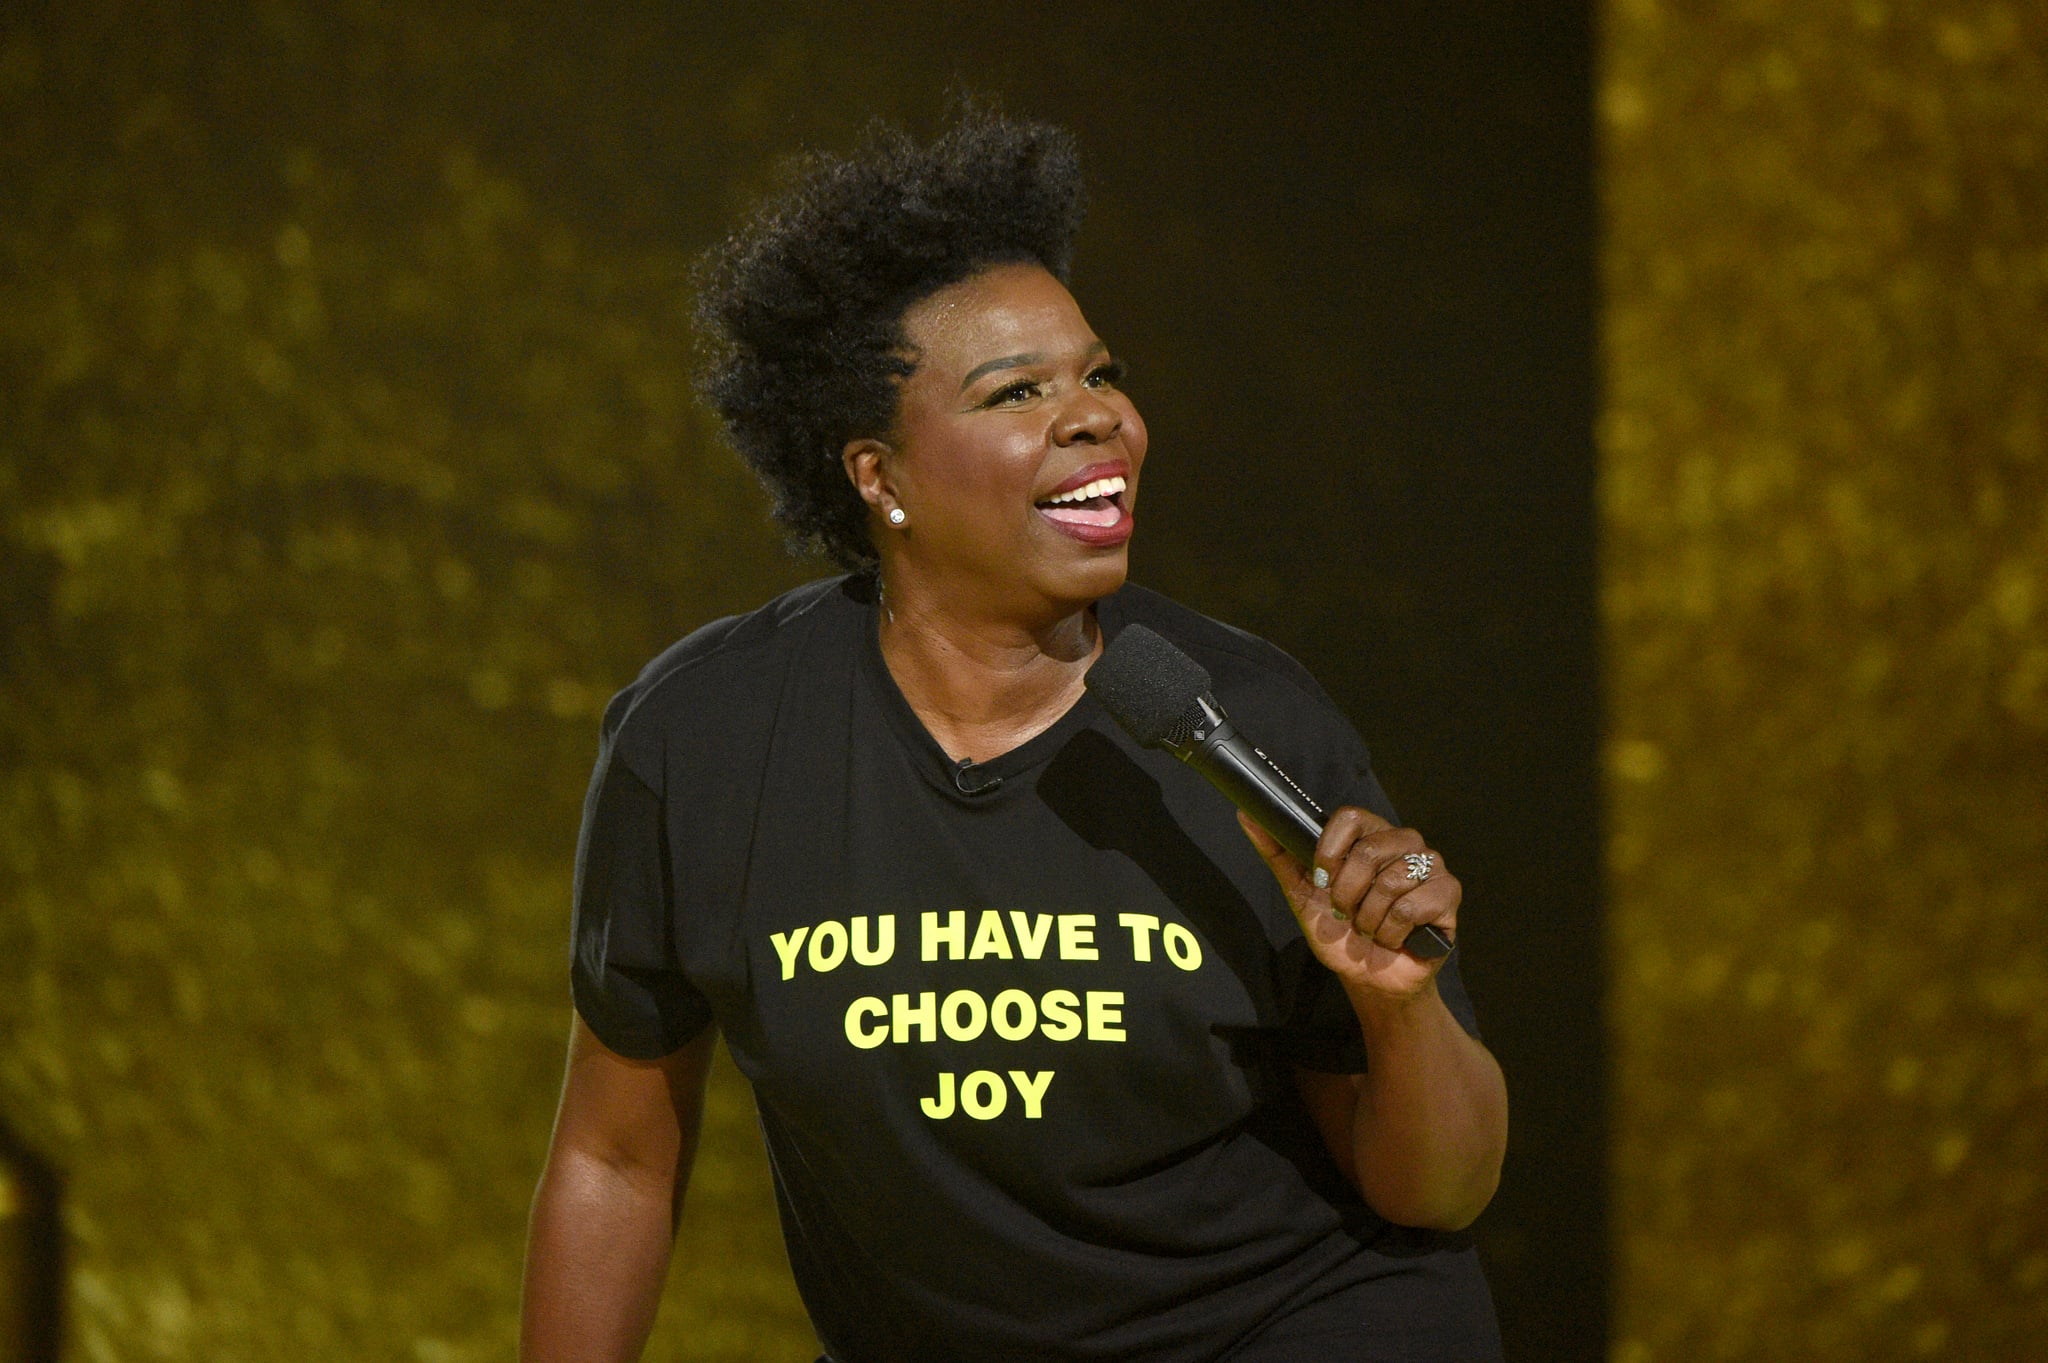 LOS ANGELES, CALIFORNIA - MAY 16: Host Leslie Jones speaks onstage during the 2021 MTV Movie & TV Awards at the Hollywood Palladium on May 16, 2021 in Los Angeles, California. (Photo by Kevin Mazur/2021 MTV Movie and TV Awards/Getty Images for MTV/ViacomCBS)